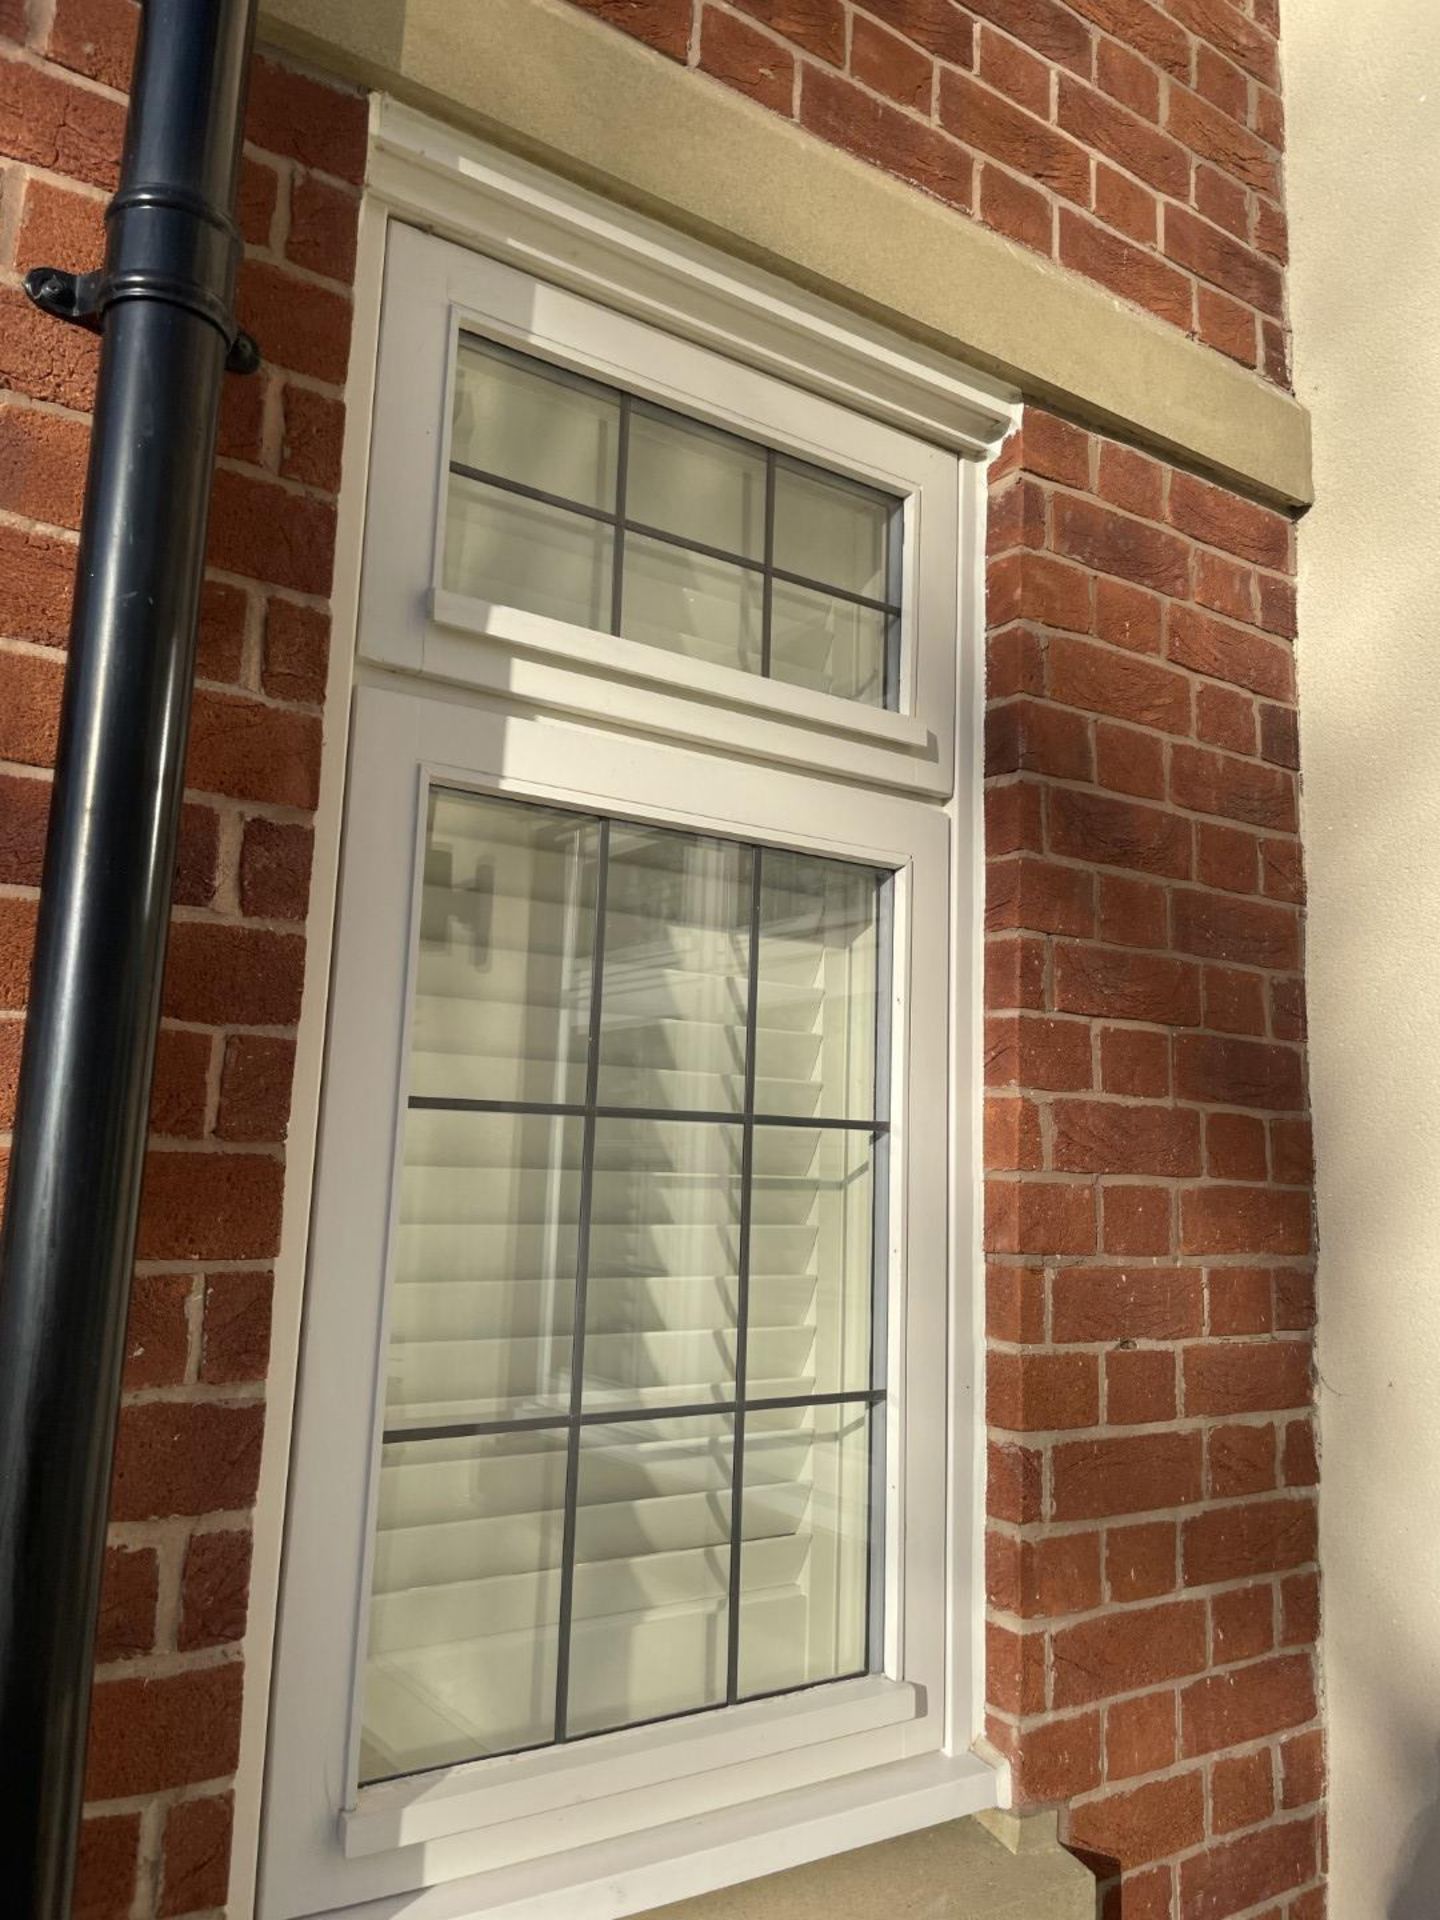 1 x Hardwood Timber Double Glazed Window Frames fitted with Shutter Blinds, In White - Ref: PAN106 - Image 7 of 23